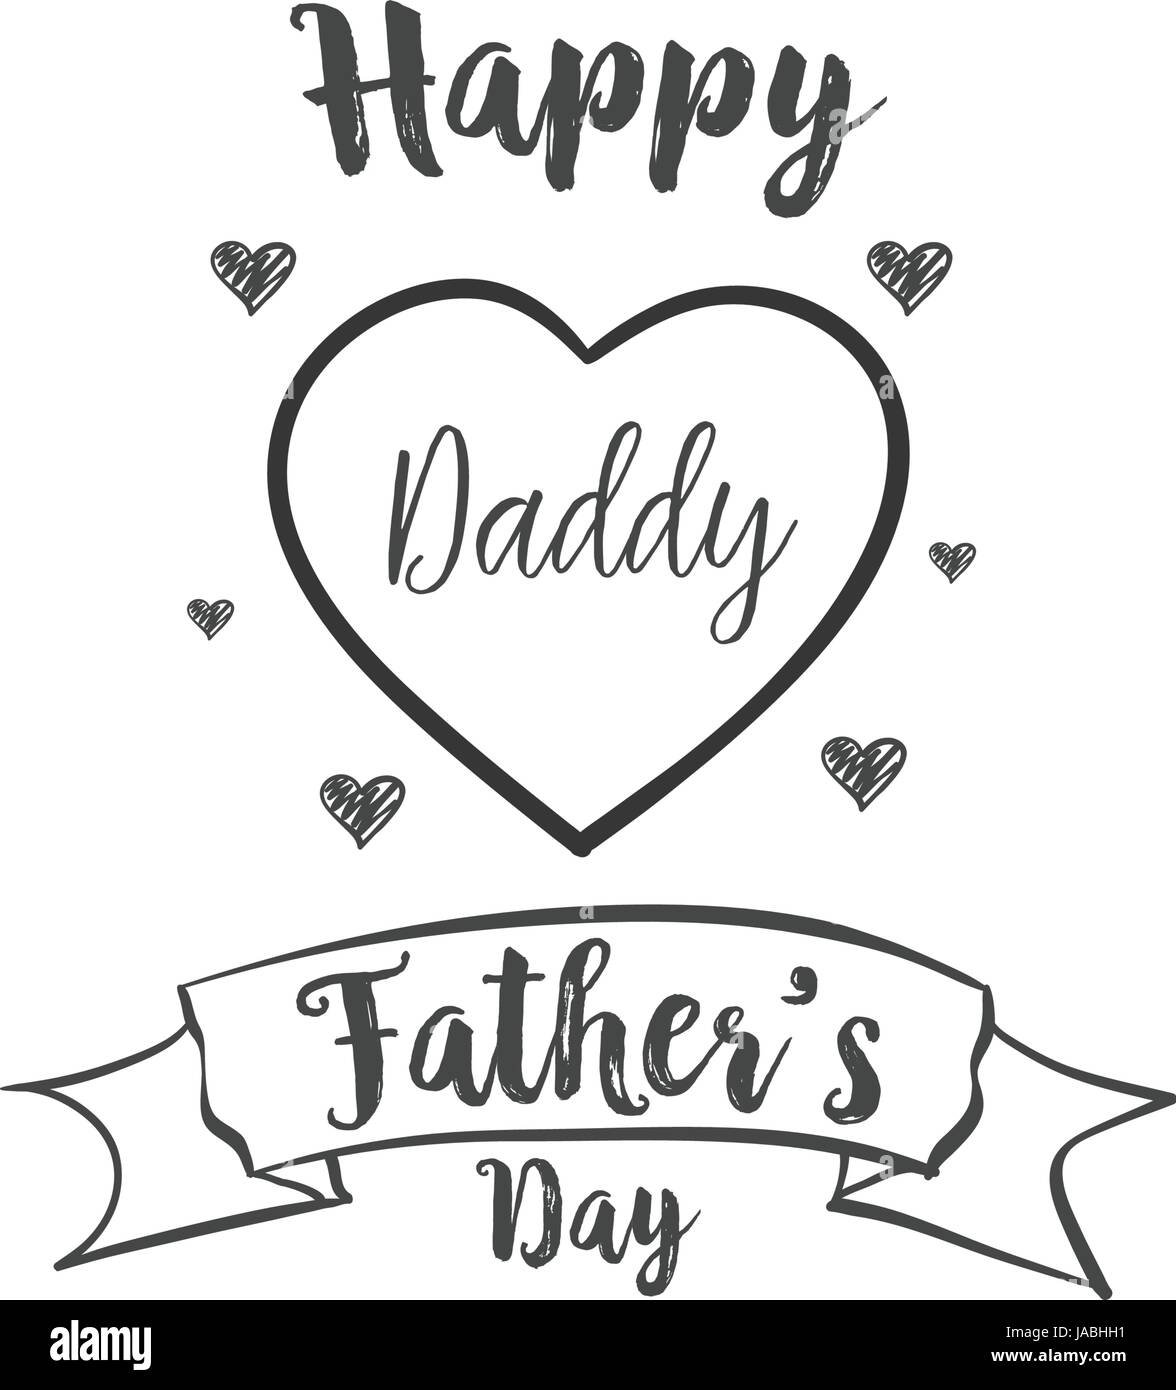 Fathers Day Drawing Images - Free Download on Freepik